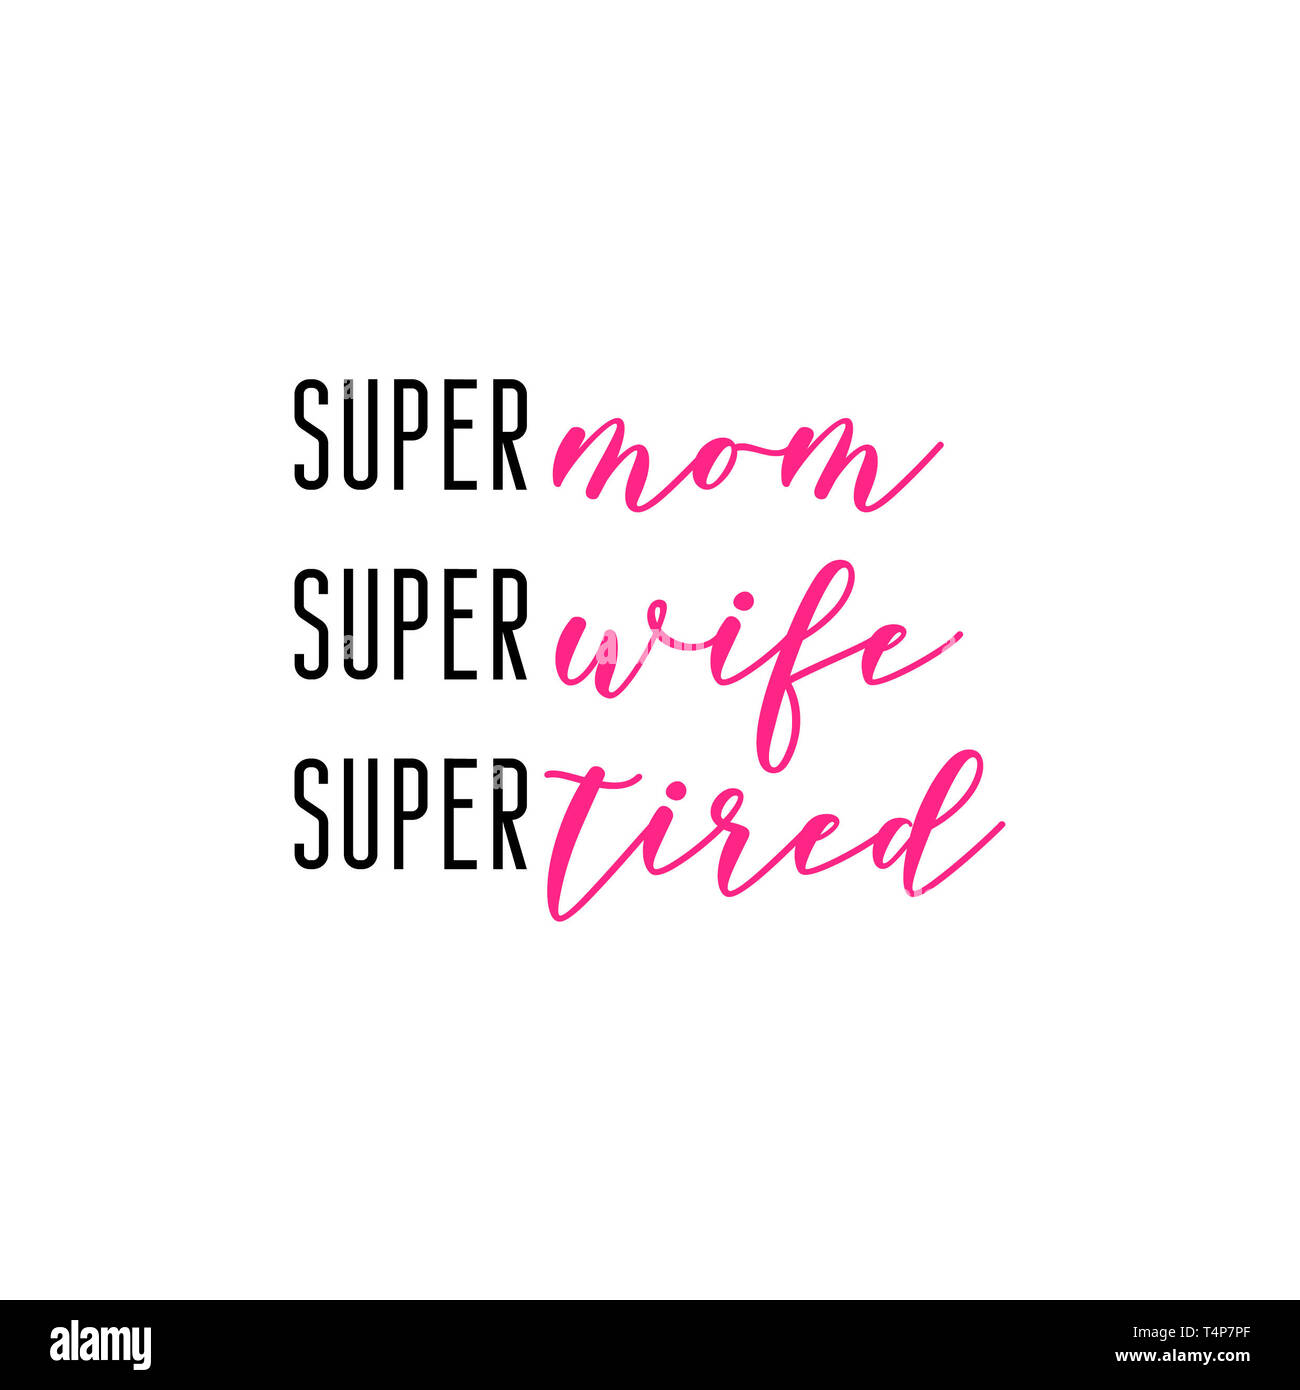 Super mom, super wife, super tired. Mother's day card Stock Photo